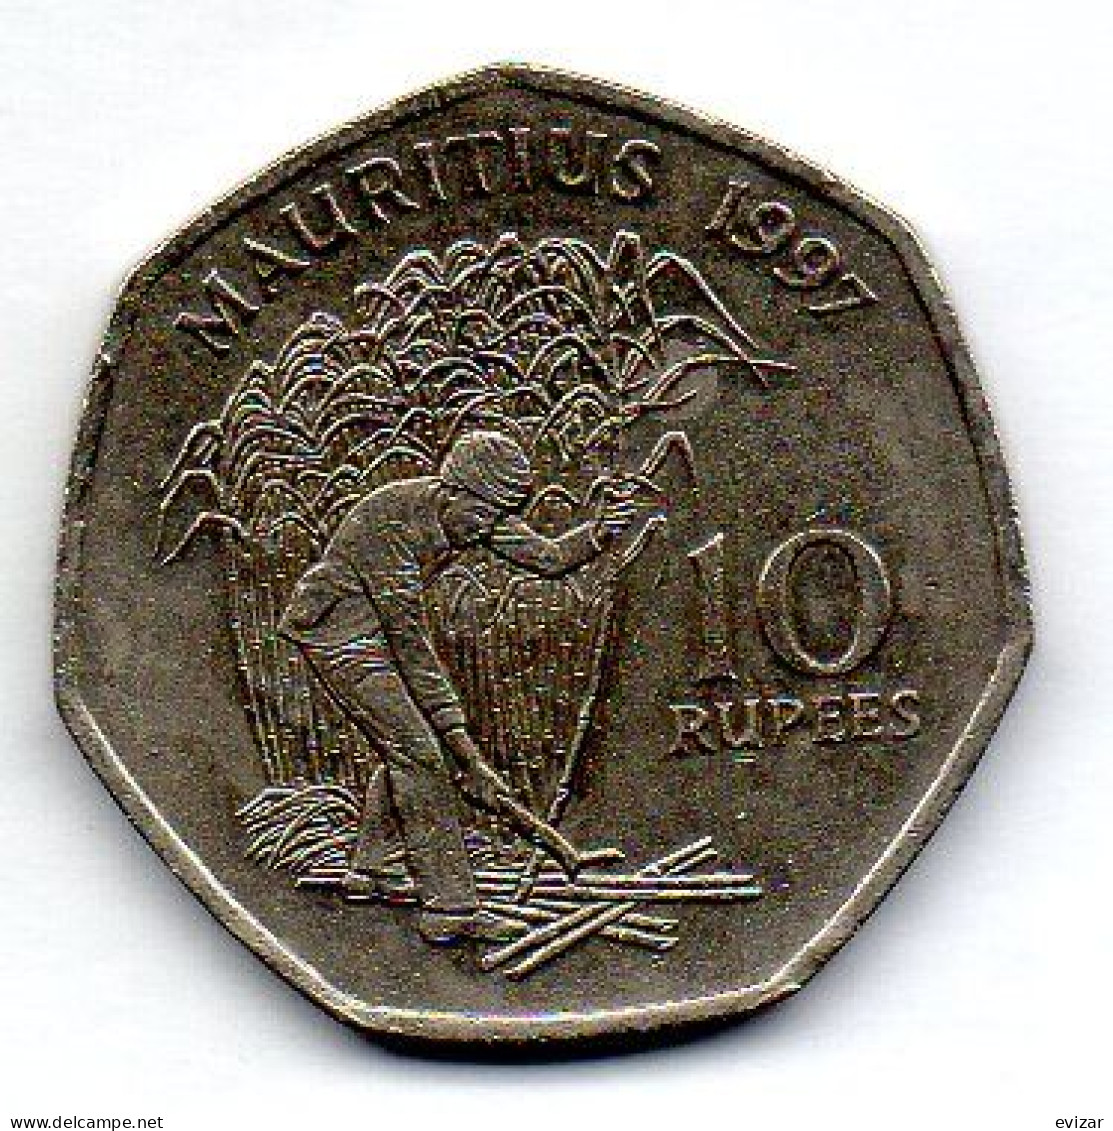 MAURITIUS, 10 Rupees, Copper-Nickel, Year 1997, KM # 61 - Maurice